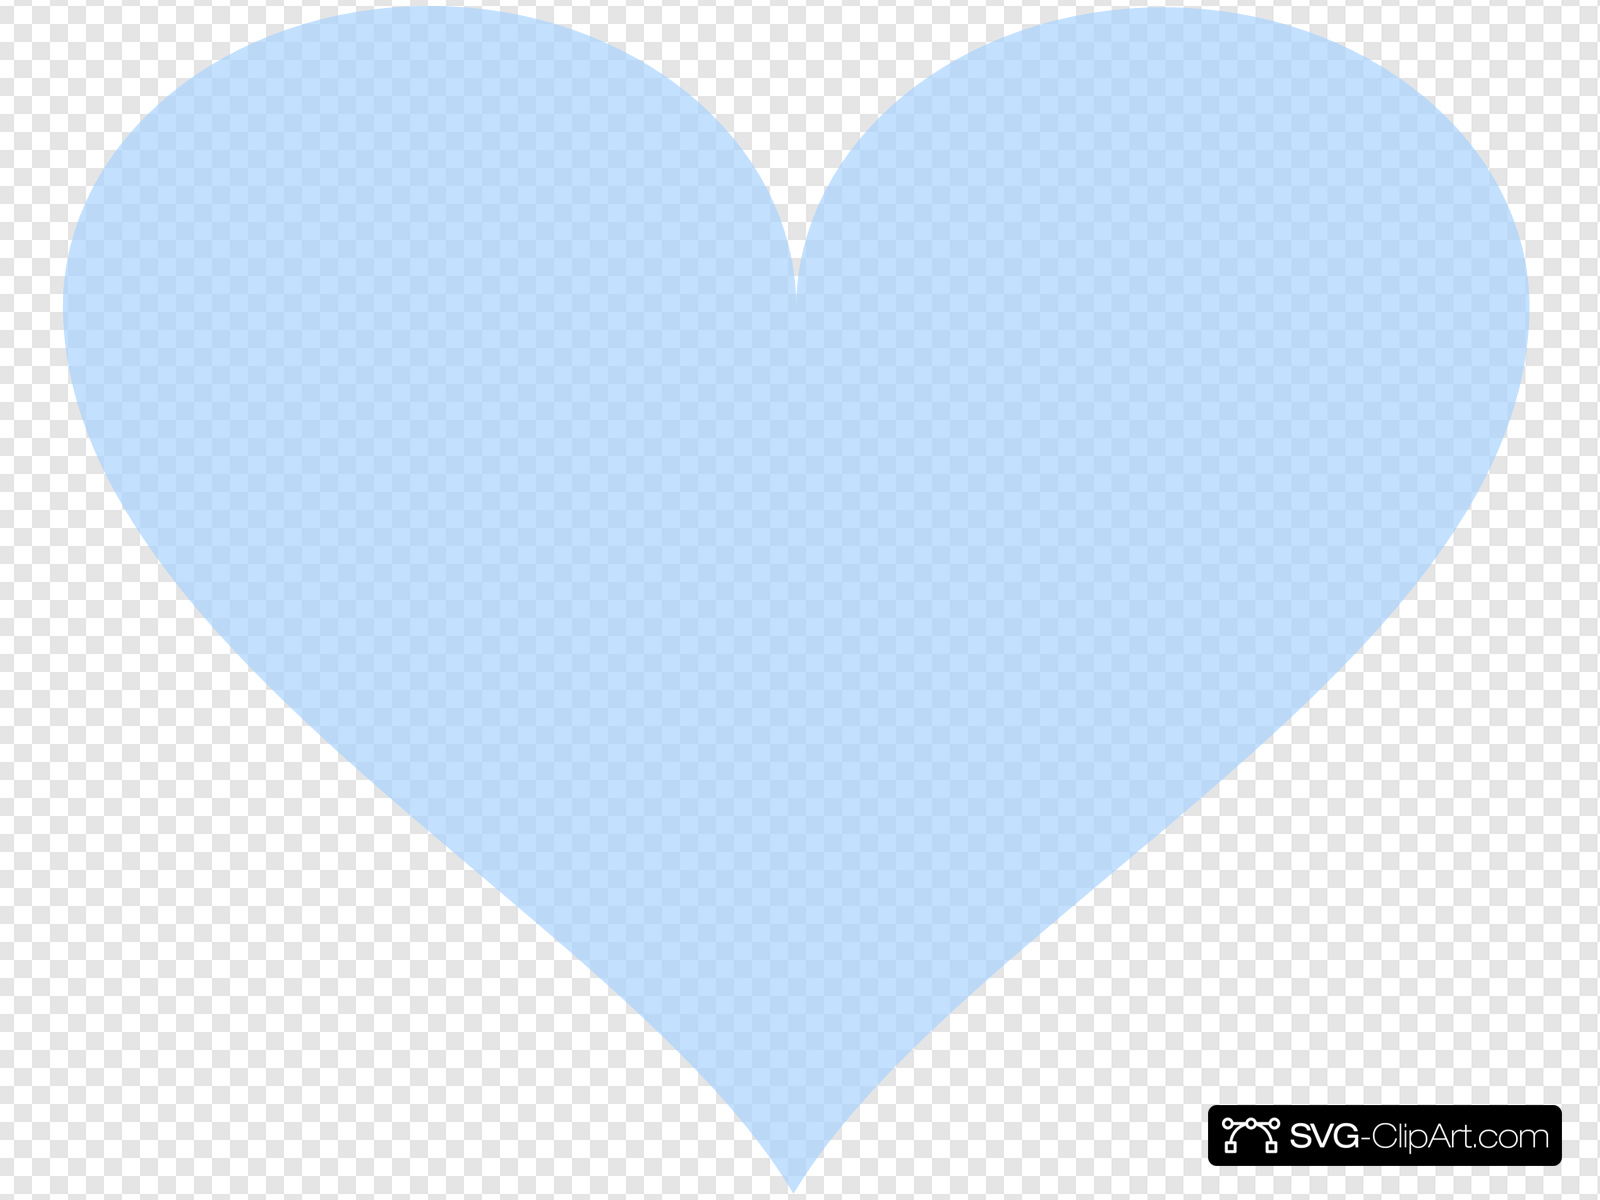 Light Blue Heart Clip art, Icon and SVG.